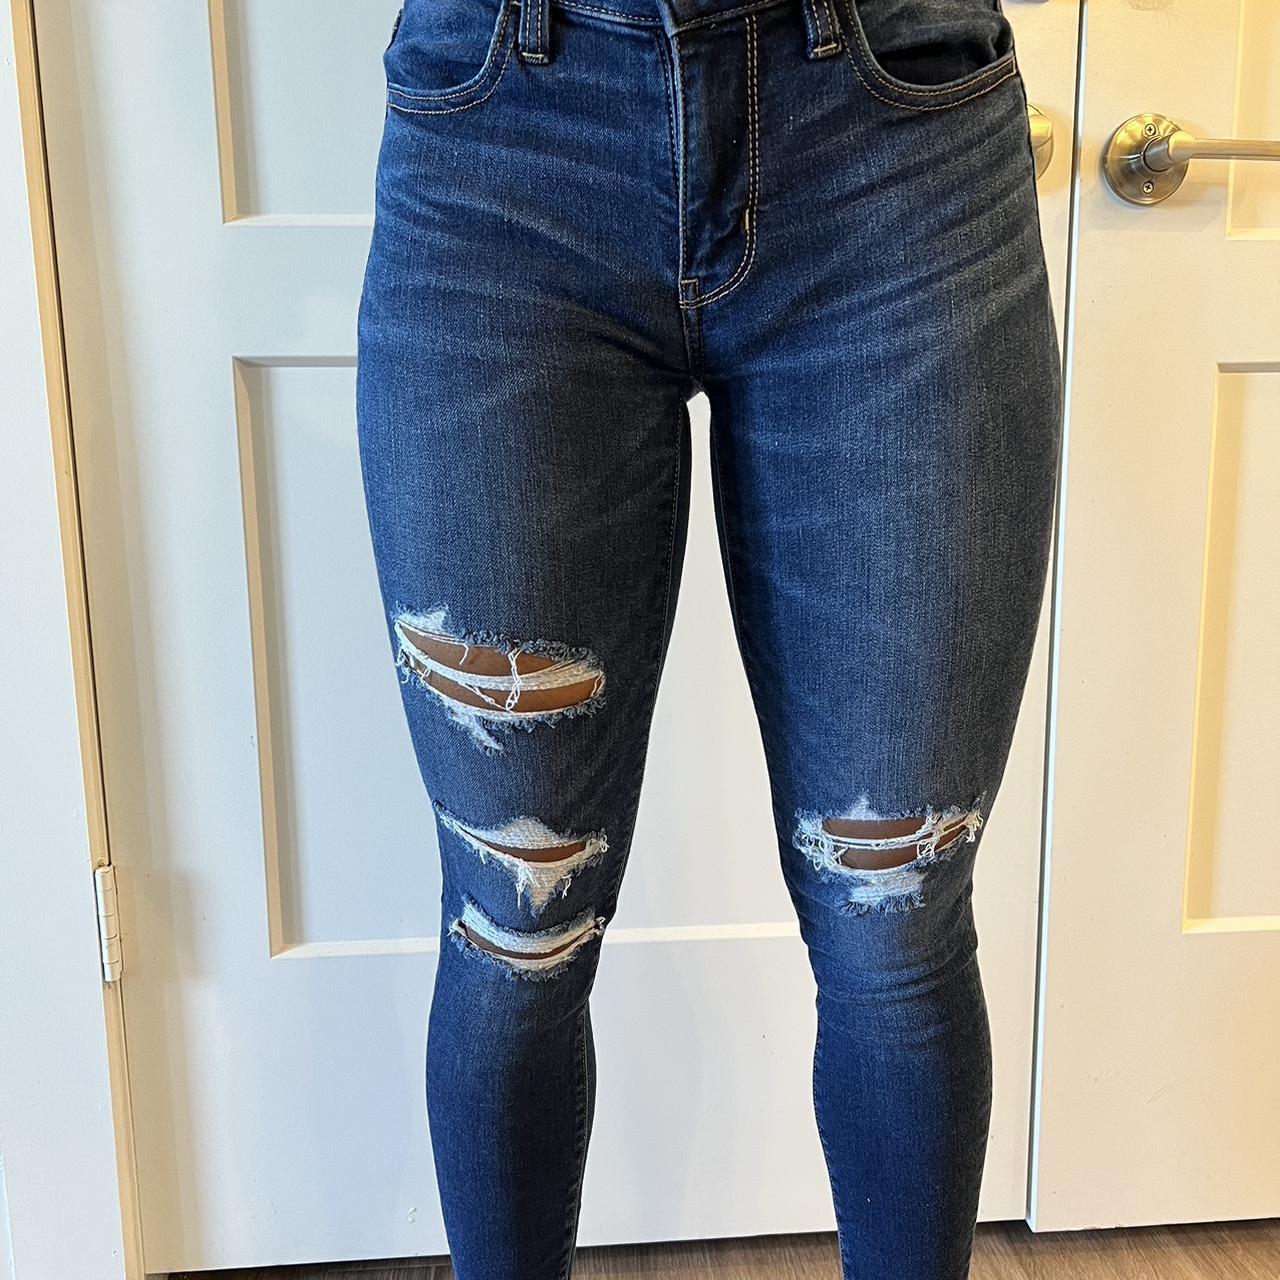 A girl wearing sexy tight jeans.